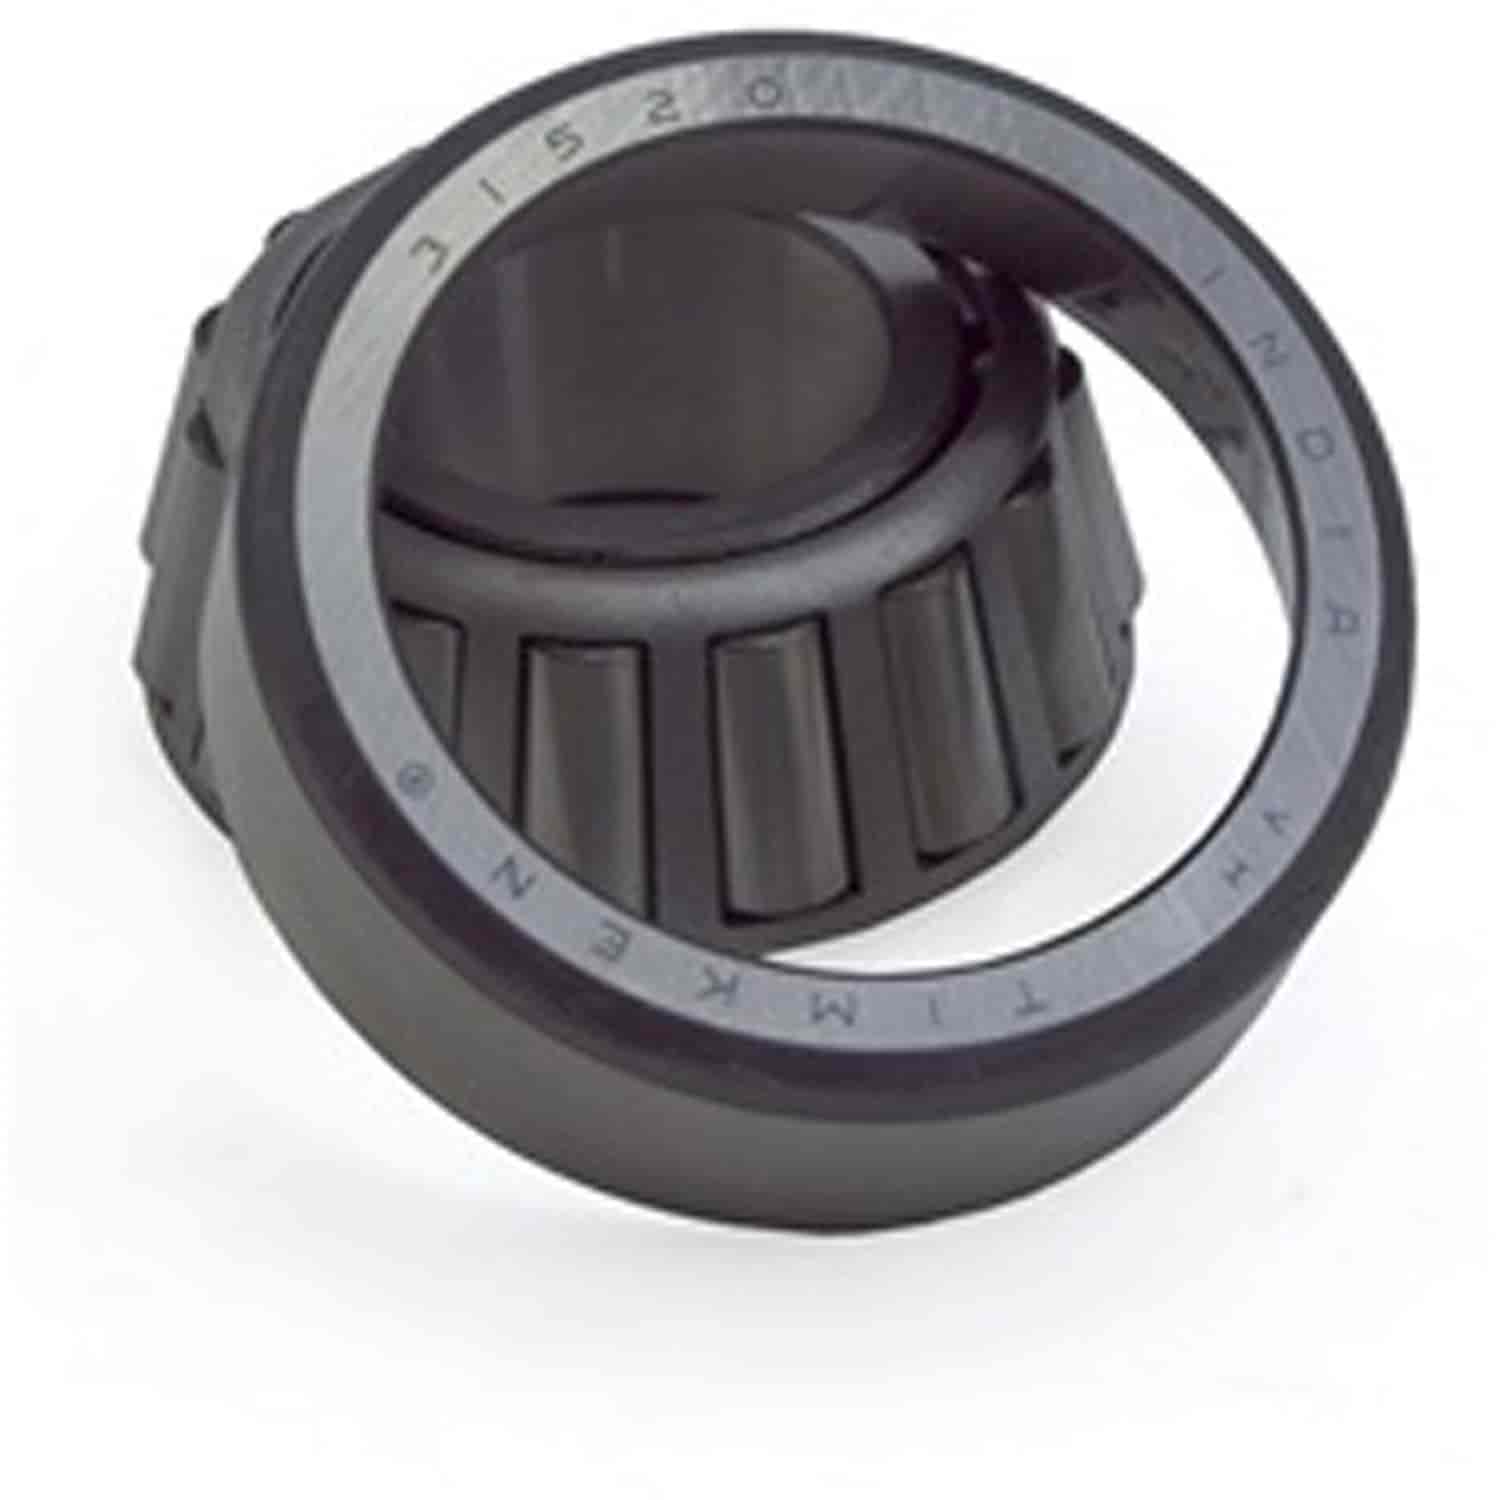 This inner pinion bearing fits the Dana 44 rear axle in 1986 CJs 87-90 XJs 86-92 MJs 87-02 Wranglers